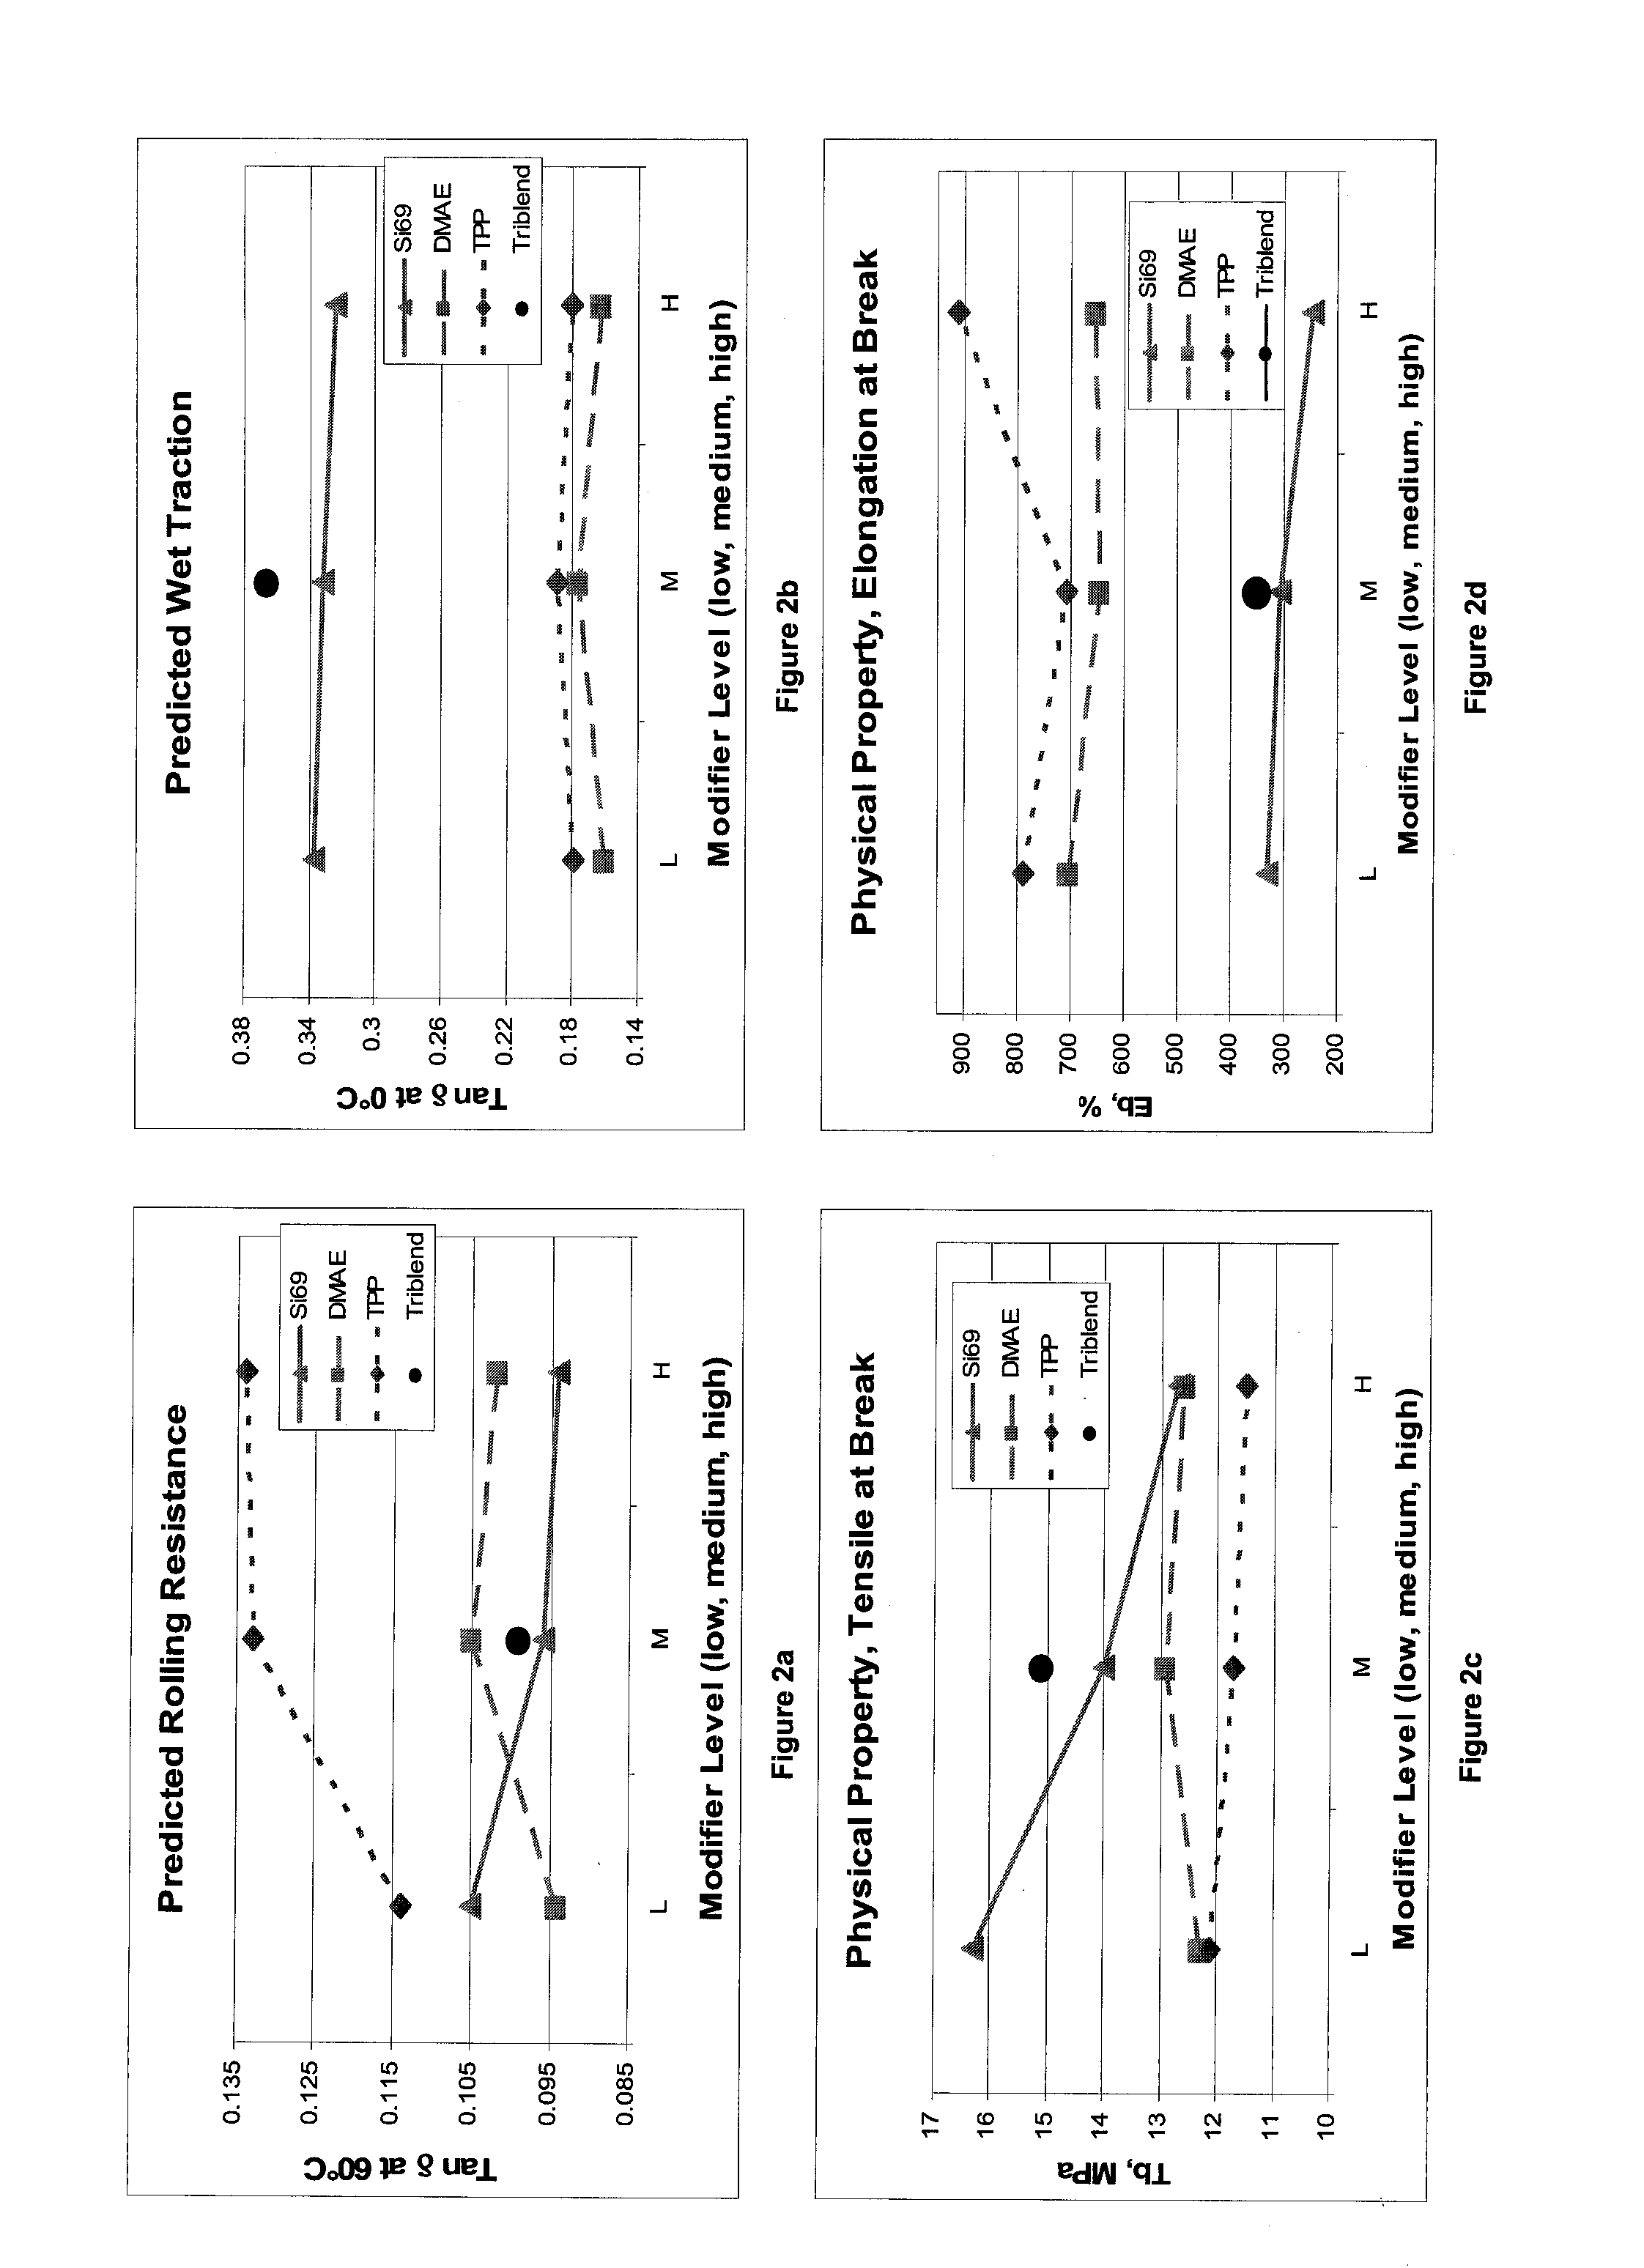 Butyl rubber compounds comprising a three component mixed modifier system